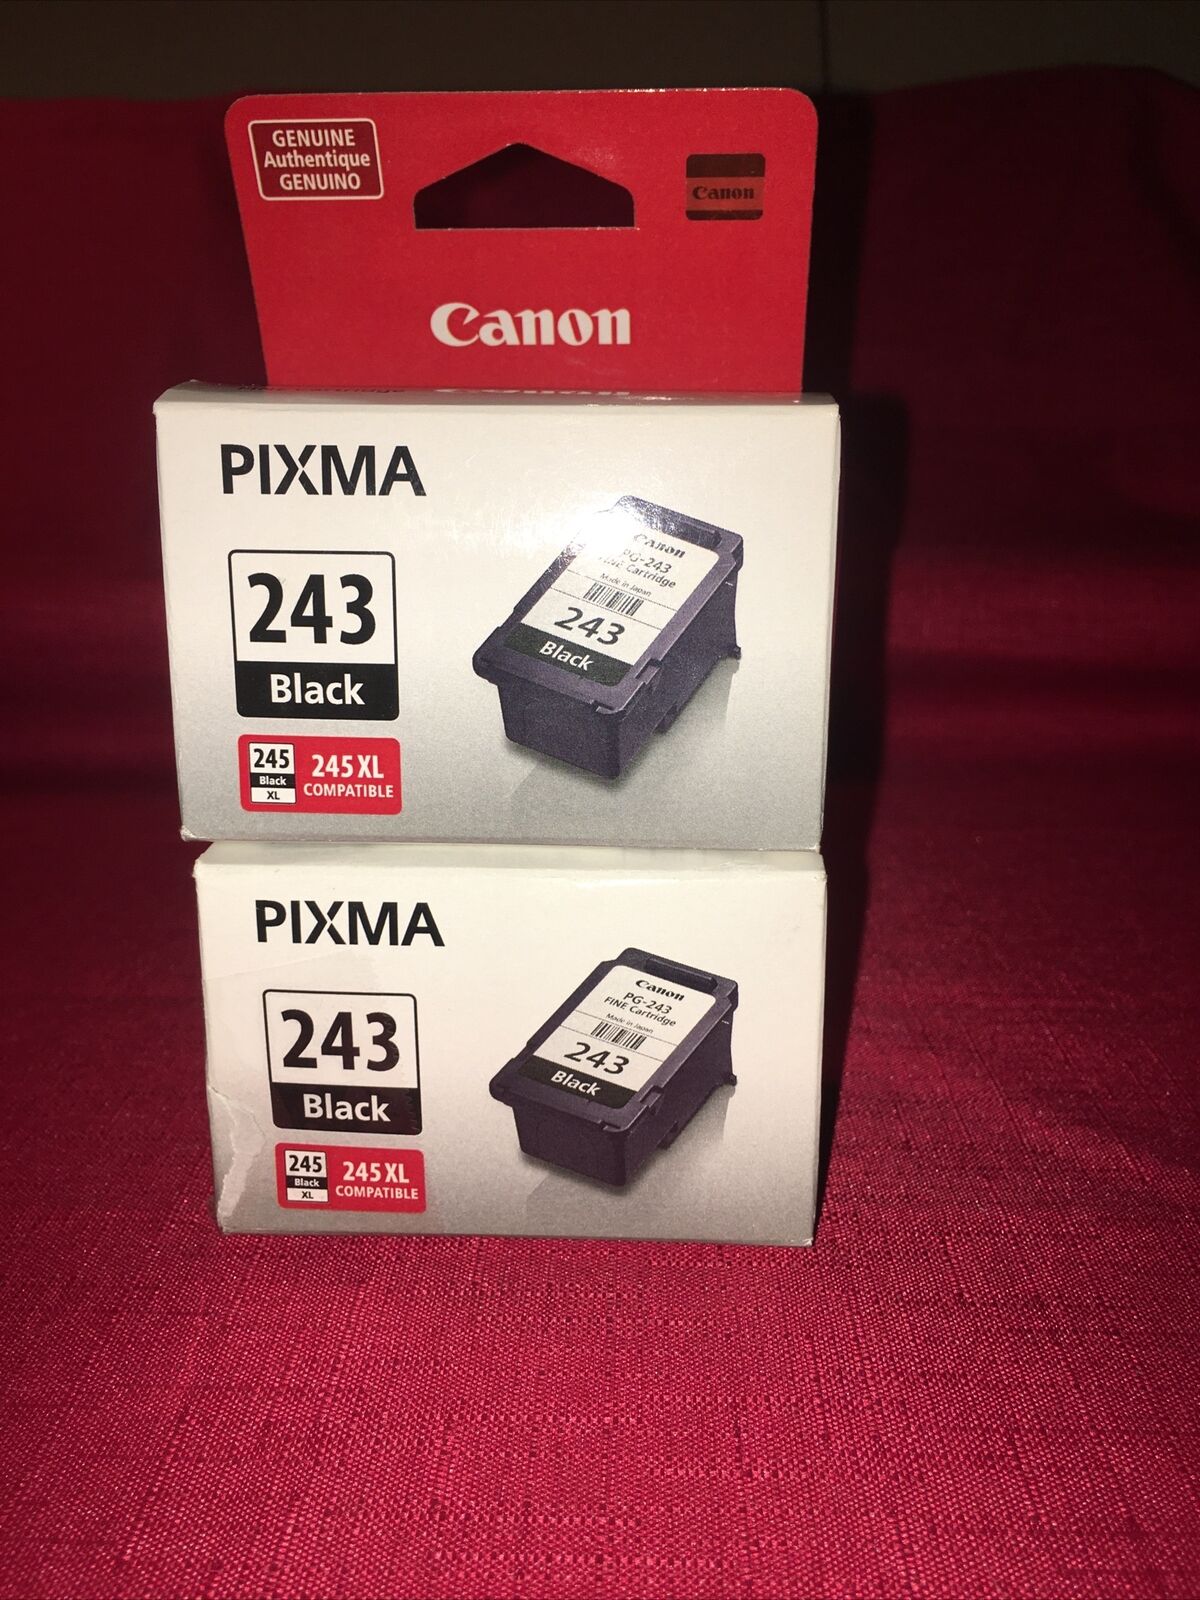 Canon 1287C004 Pixma 243 Black Fine Ink Cartridge- One Box Is Open But Not Used